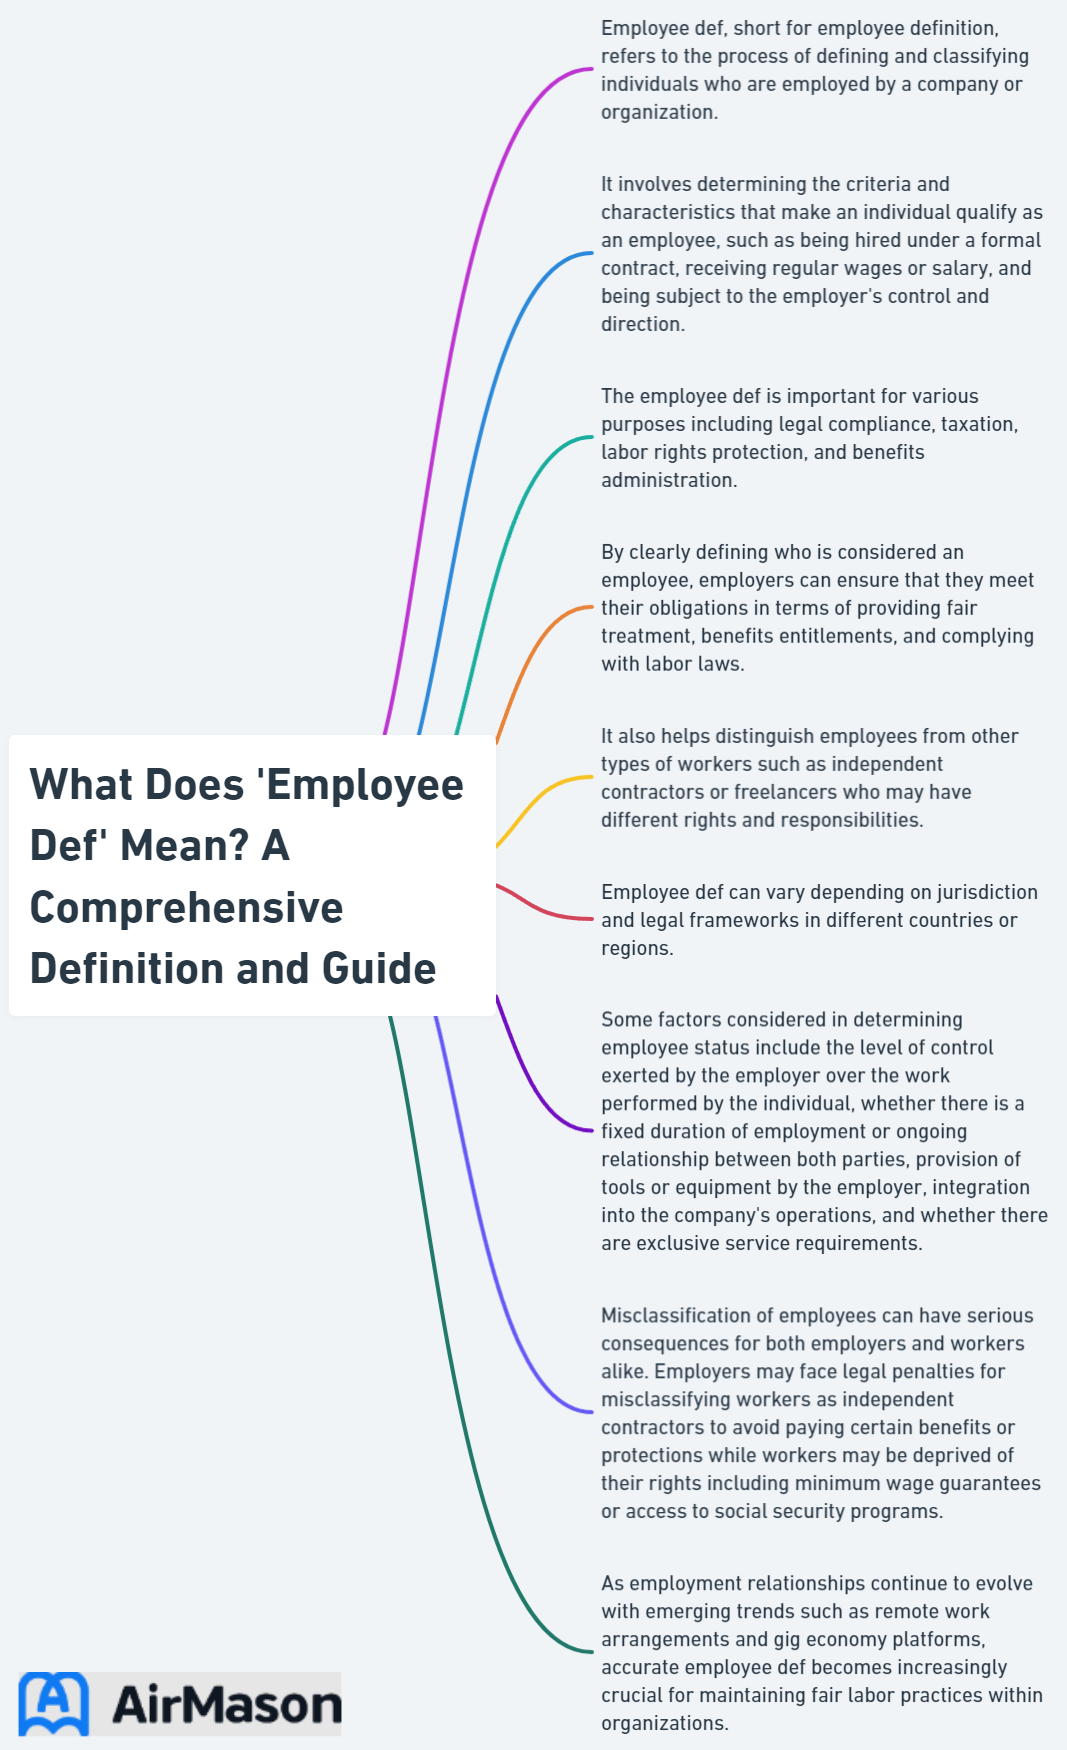 What Does 'Employee Def' Mean? A Comprehensive Definition and Guide